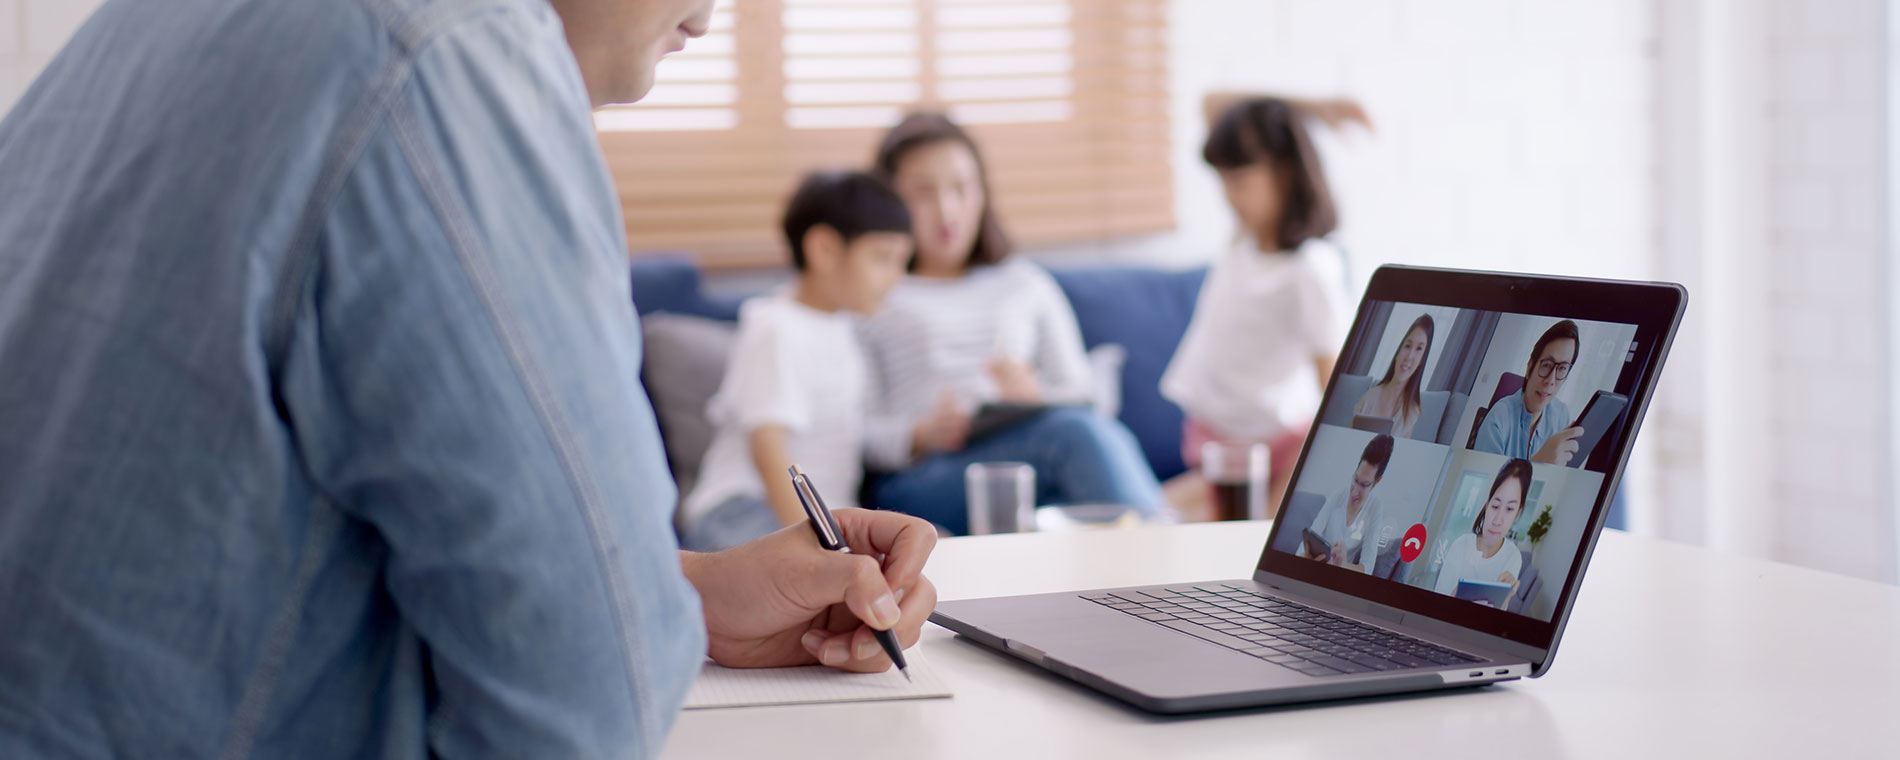 Employee using a seamless, secure and unified platform for voice and video collaboration to connect with colleagues remotely and meet organizational goals.